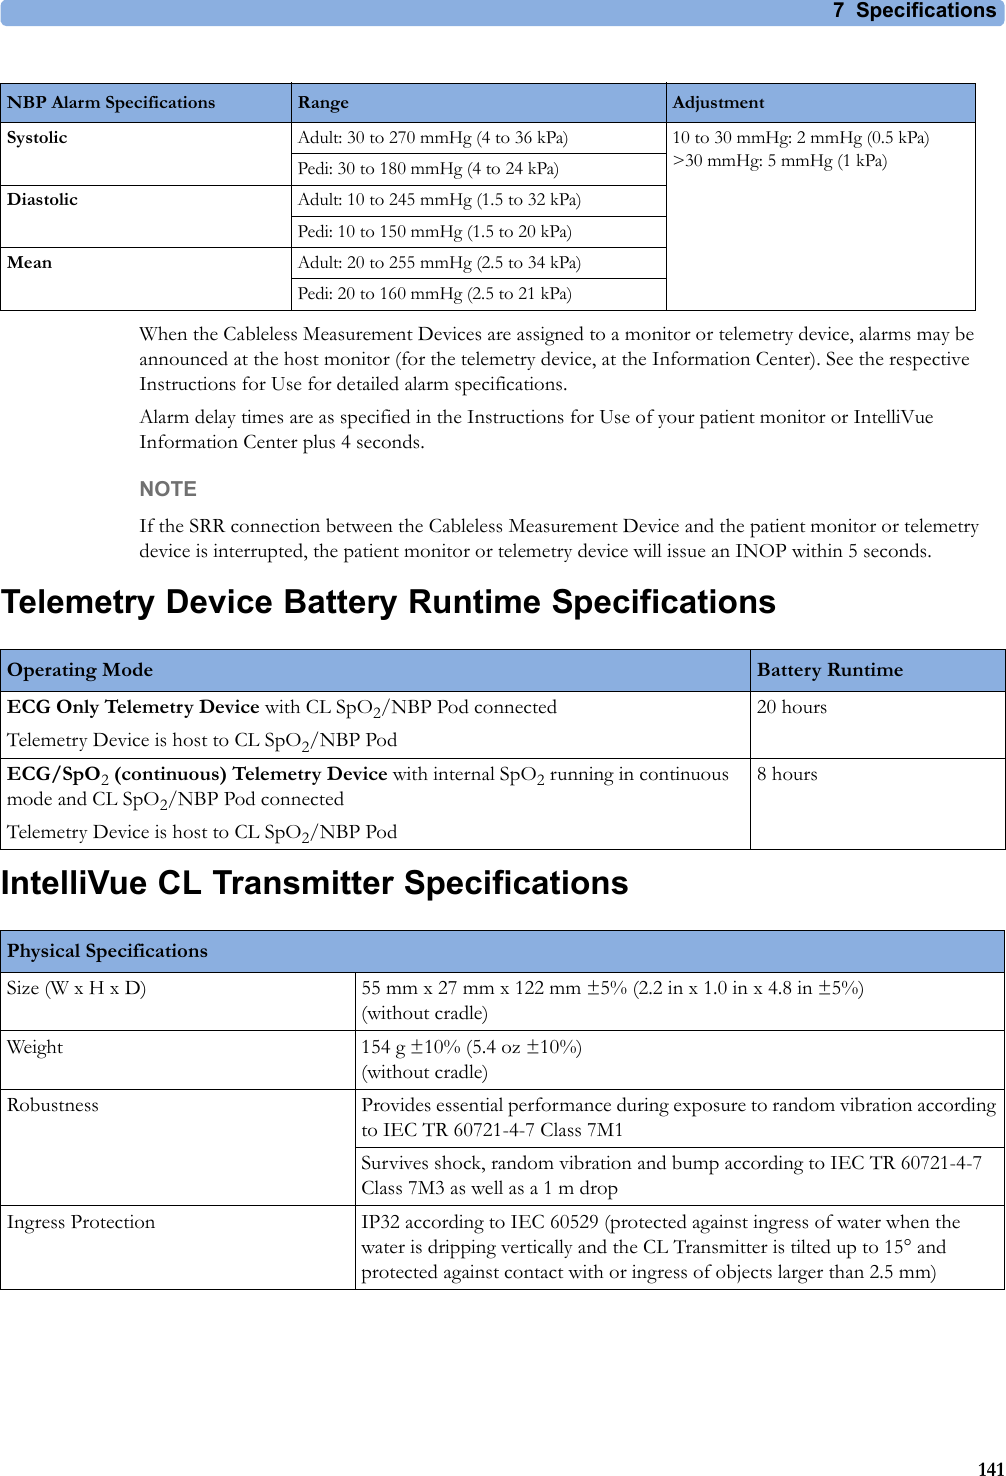 7 Specifications141When the Cableless Measurement Devices are assigned to a monitor or telemetry device, alarms may be announced at the host monitor (for the telemetry device, at the Information Center). See the respective Instructions for Use for detailed alarm specifications.Alarm delay times are as specified in the Instructions for Use of your patient monitor or IntelliVue Information Center plus 4 seconds.NOTEIf the SRR connection between the Cableless Measurement Device and the patient monitor or telemetry device is interrupted, the patient monitor or telemetry device will issue an INOP within 5 seconds.Telemetry Device Battery Runtime SpecificationsIntelliVue CL Transmitter SpecificationsNBP Alarm Specifications Range AdjustmentSystolic Adult: 30 to 270 mmHg (4 to 36 kPa) 10 to 30 mmHg: 2 mmHg (0.5 kPa)&gt;30mmHg: 5mmHg (1kPa)Pedi: 30 to 180 mmHg (4 to 24 kPa)Diastolic Adult: 10 to 245 mmHg (1.5 to 32 kPa)Pedi: 10 to 150 mmHg (1.5 to 20 kPa)Mean Adult: 20 to 255 mmHg (2.5 to 34 kPa)Pedi: 20 to 160 mmHg (2.5 to 21 kPa)Operating Mode Battery RuntimeECG Only Telemetry Device with CL SpO2/NBP Pod connectedTelemetry Device is host to CL SpO2/NBP Pod20 hoursECG/SpO2 (continuous) Telemetry Device with internal SpO2 running in continuous mode and CL SpO2/NBP Pod connectedTelemetry Device is host to CL SpO2/NBP Pod8 hoursPhysical SpecificationsSize (W x H x D) 55 mm x 27 mm x 122 mm ±5% (2.2 in x 1.0 in x 4.8 in ±5%)(without cradle)Weight 154 g ±10% (5.4 oz ±10%)(without cradle)Robustness Provides essential performance during exposure to random vibration according to IEC TR 60721-4-7 Class 7M1Survives shock, random vibration and bump according to IEC TR 60721-4-7 Class 7M3 as well as a 1 m dropIngress Protection IP32 according to IEC 60529 (protected against ingress of water when the water is dripping vertically and the CL Transmitter is tilted up to 15° and protected against contact with or ingress of objects larger than 2.5 mm)